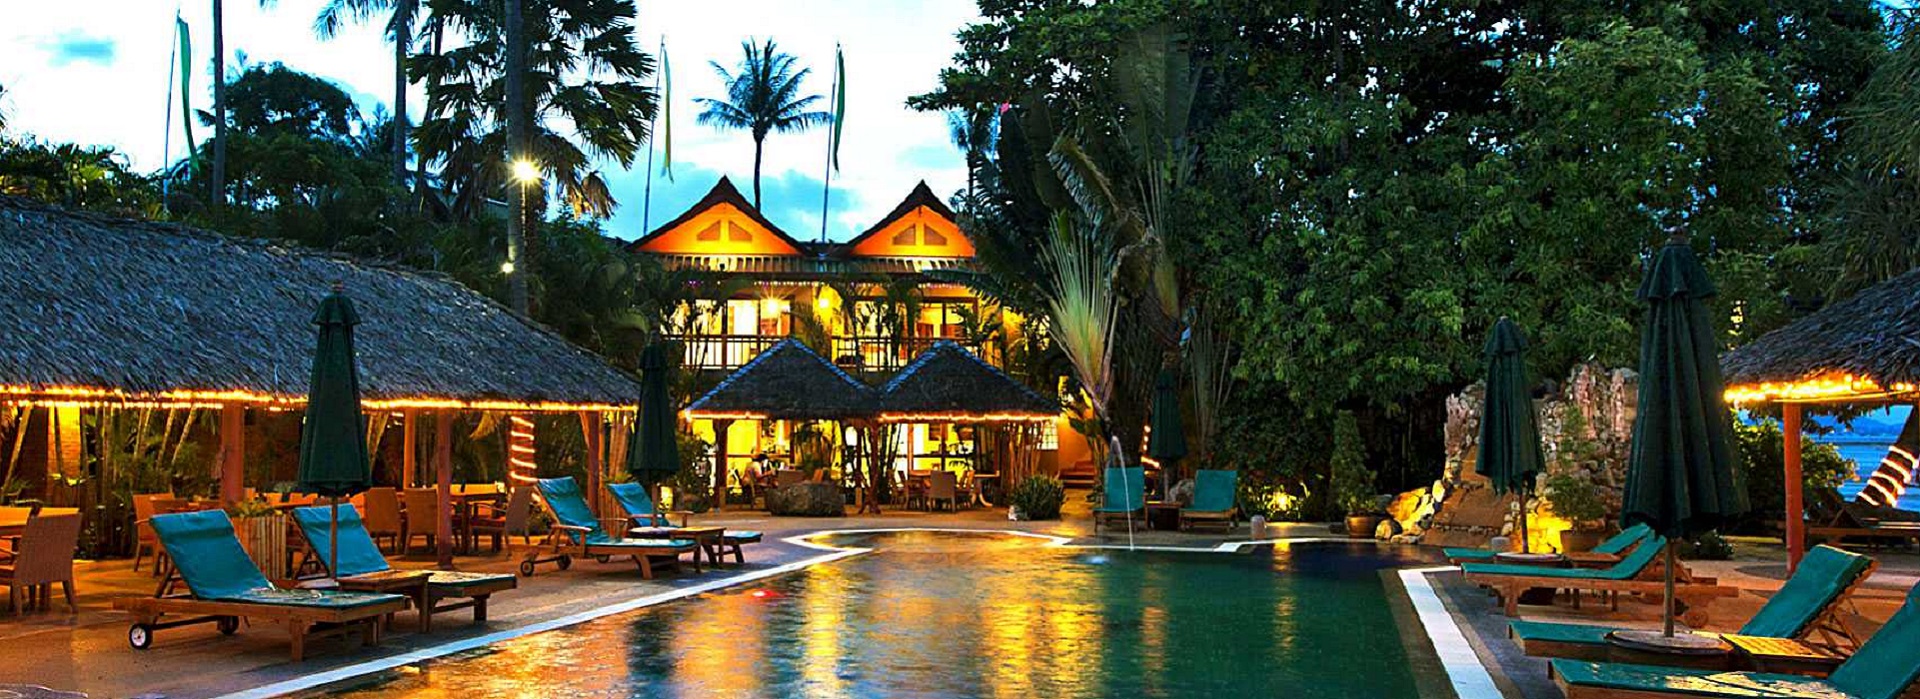 About Phuket and the Friendship Beach Resort